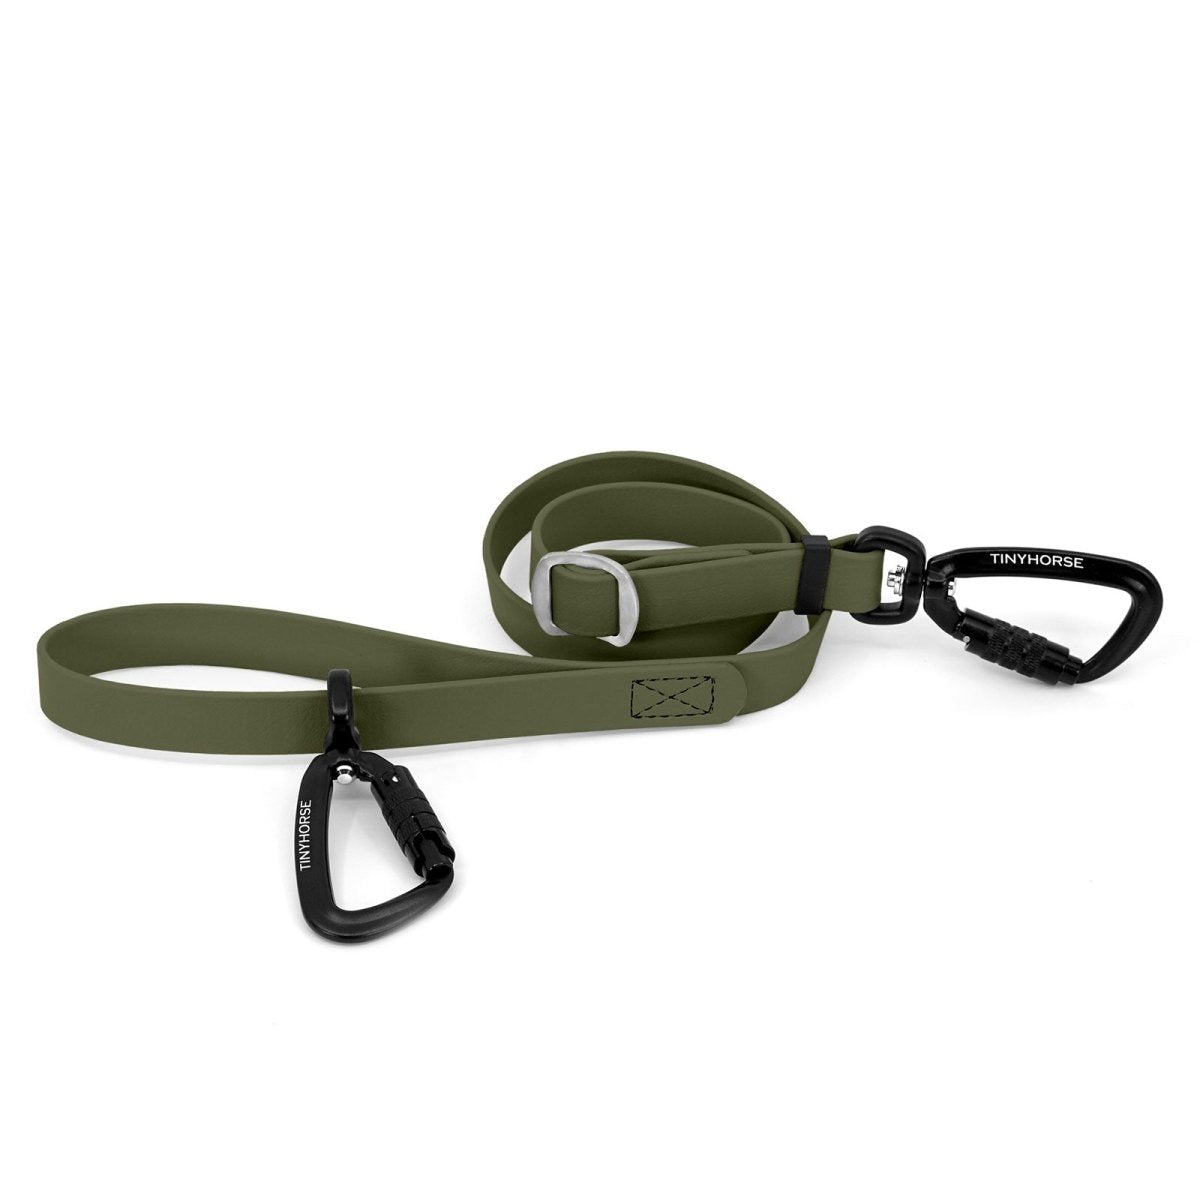 An adjustable olive-coloured Lead-All Pro made of BioThane with 2 auto-locking carabiners